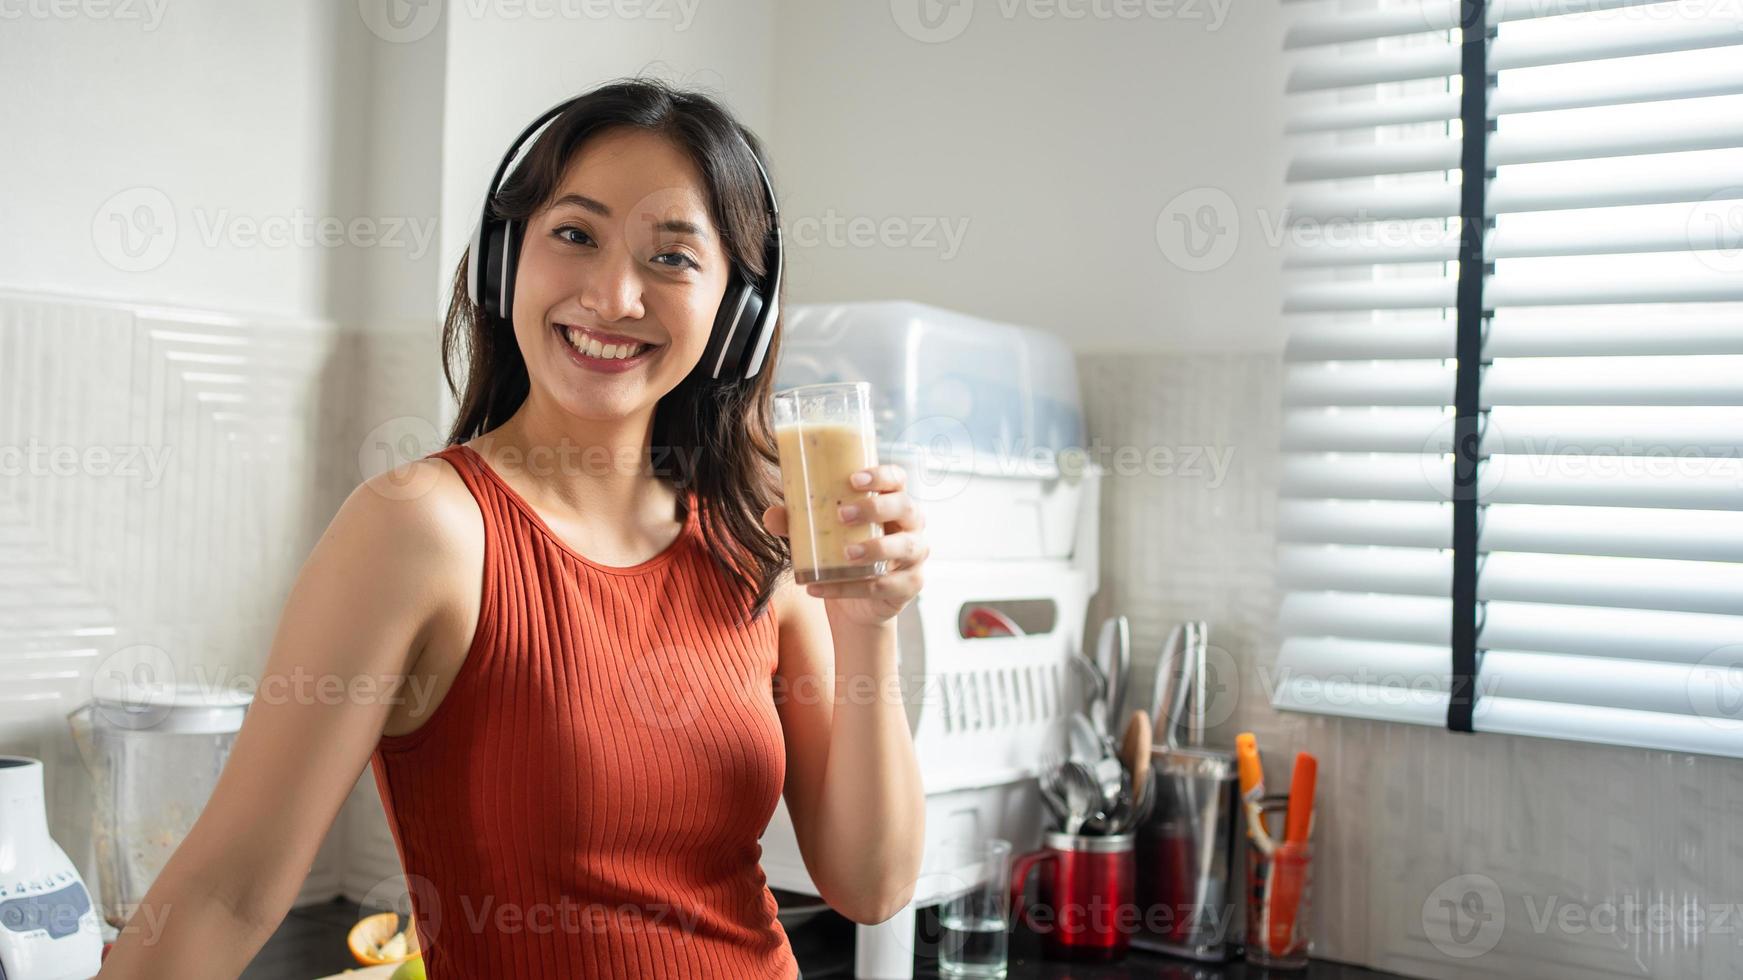 Beautiful young woman making and drinking smoothies from fruits in the kitchen at home while listening to music through headphones - lifestyles concepts photo